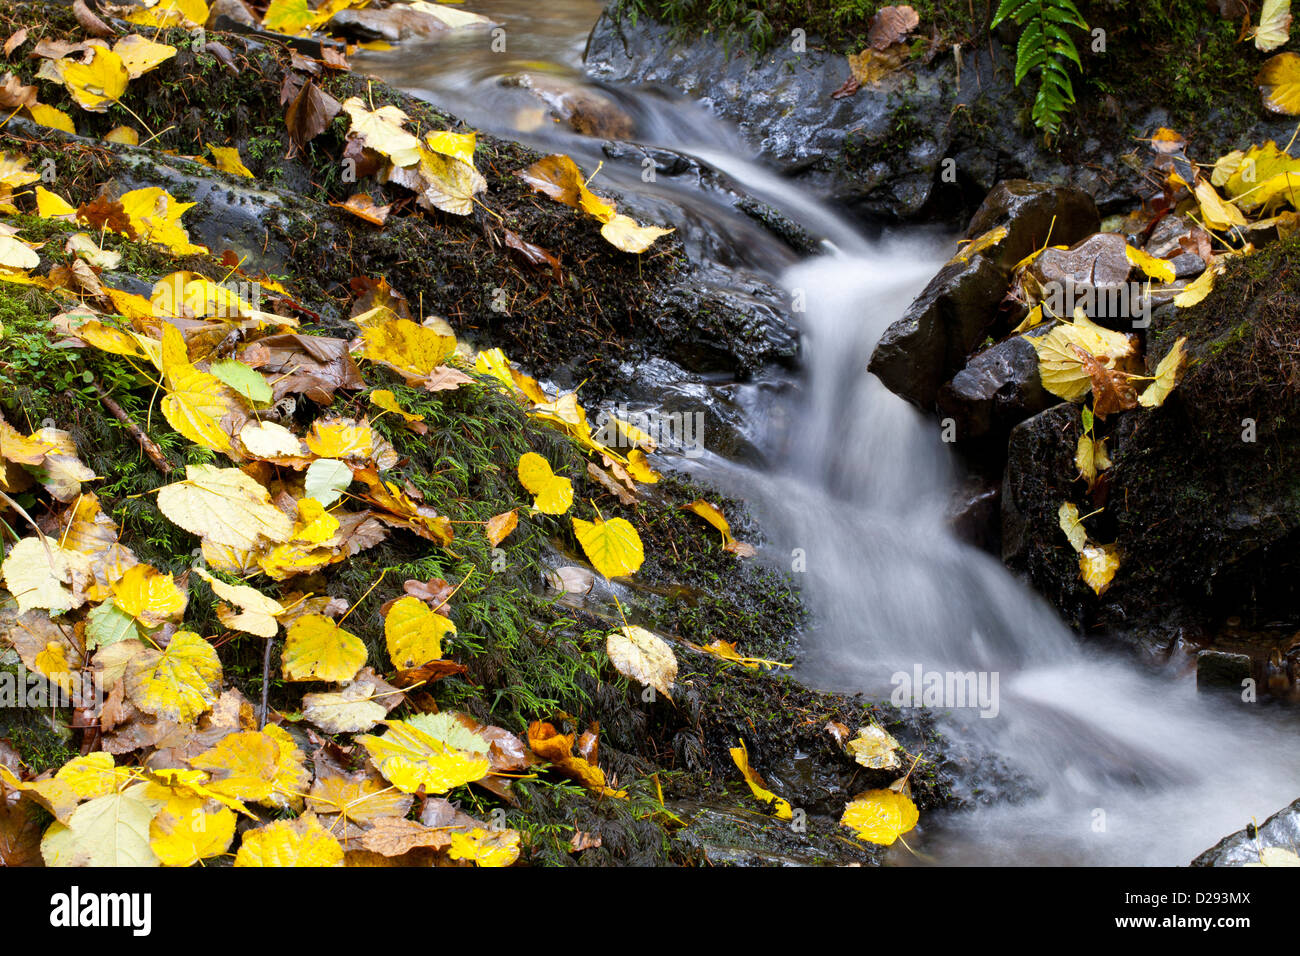 Fallen autumn leaves of Small Leaved Lime tree (Tilia cordata) beside a stream. Near Coniston Water, The Lake District, England. Stock Photo